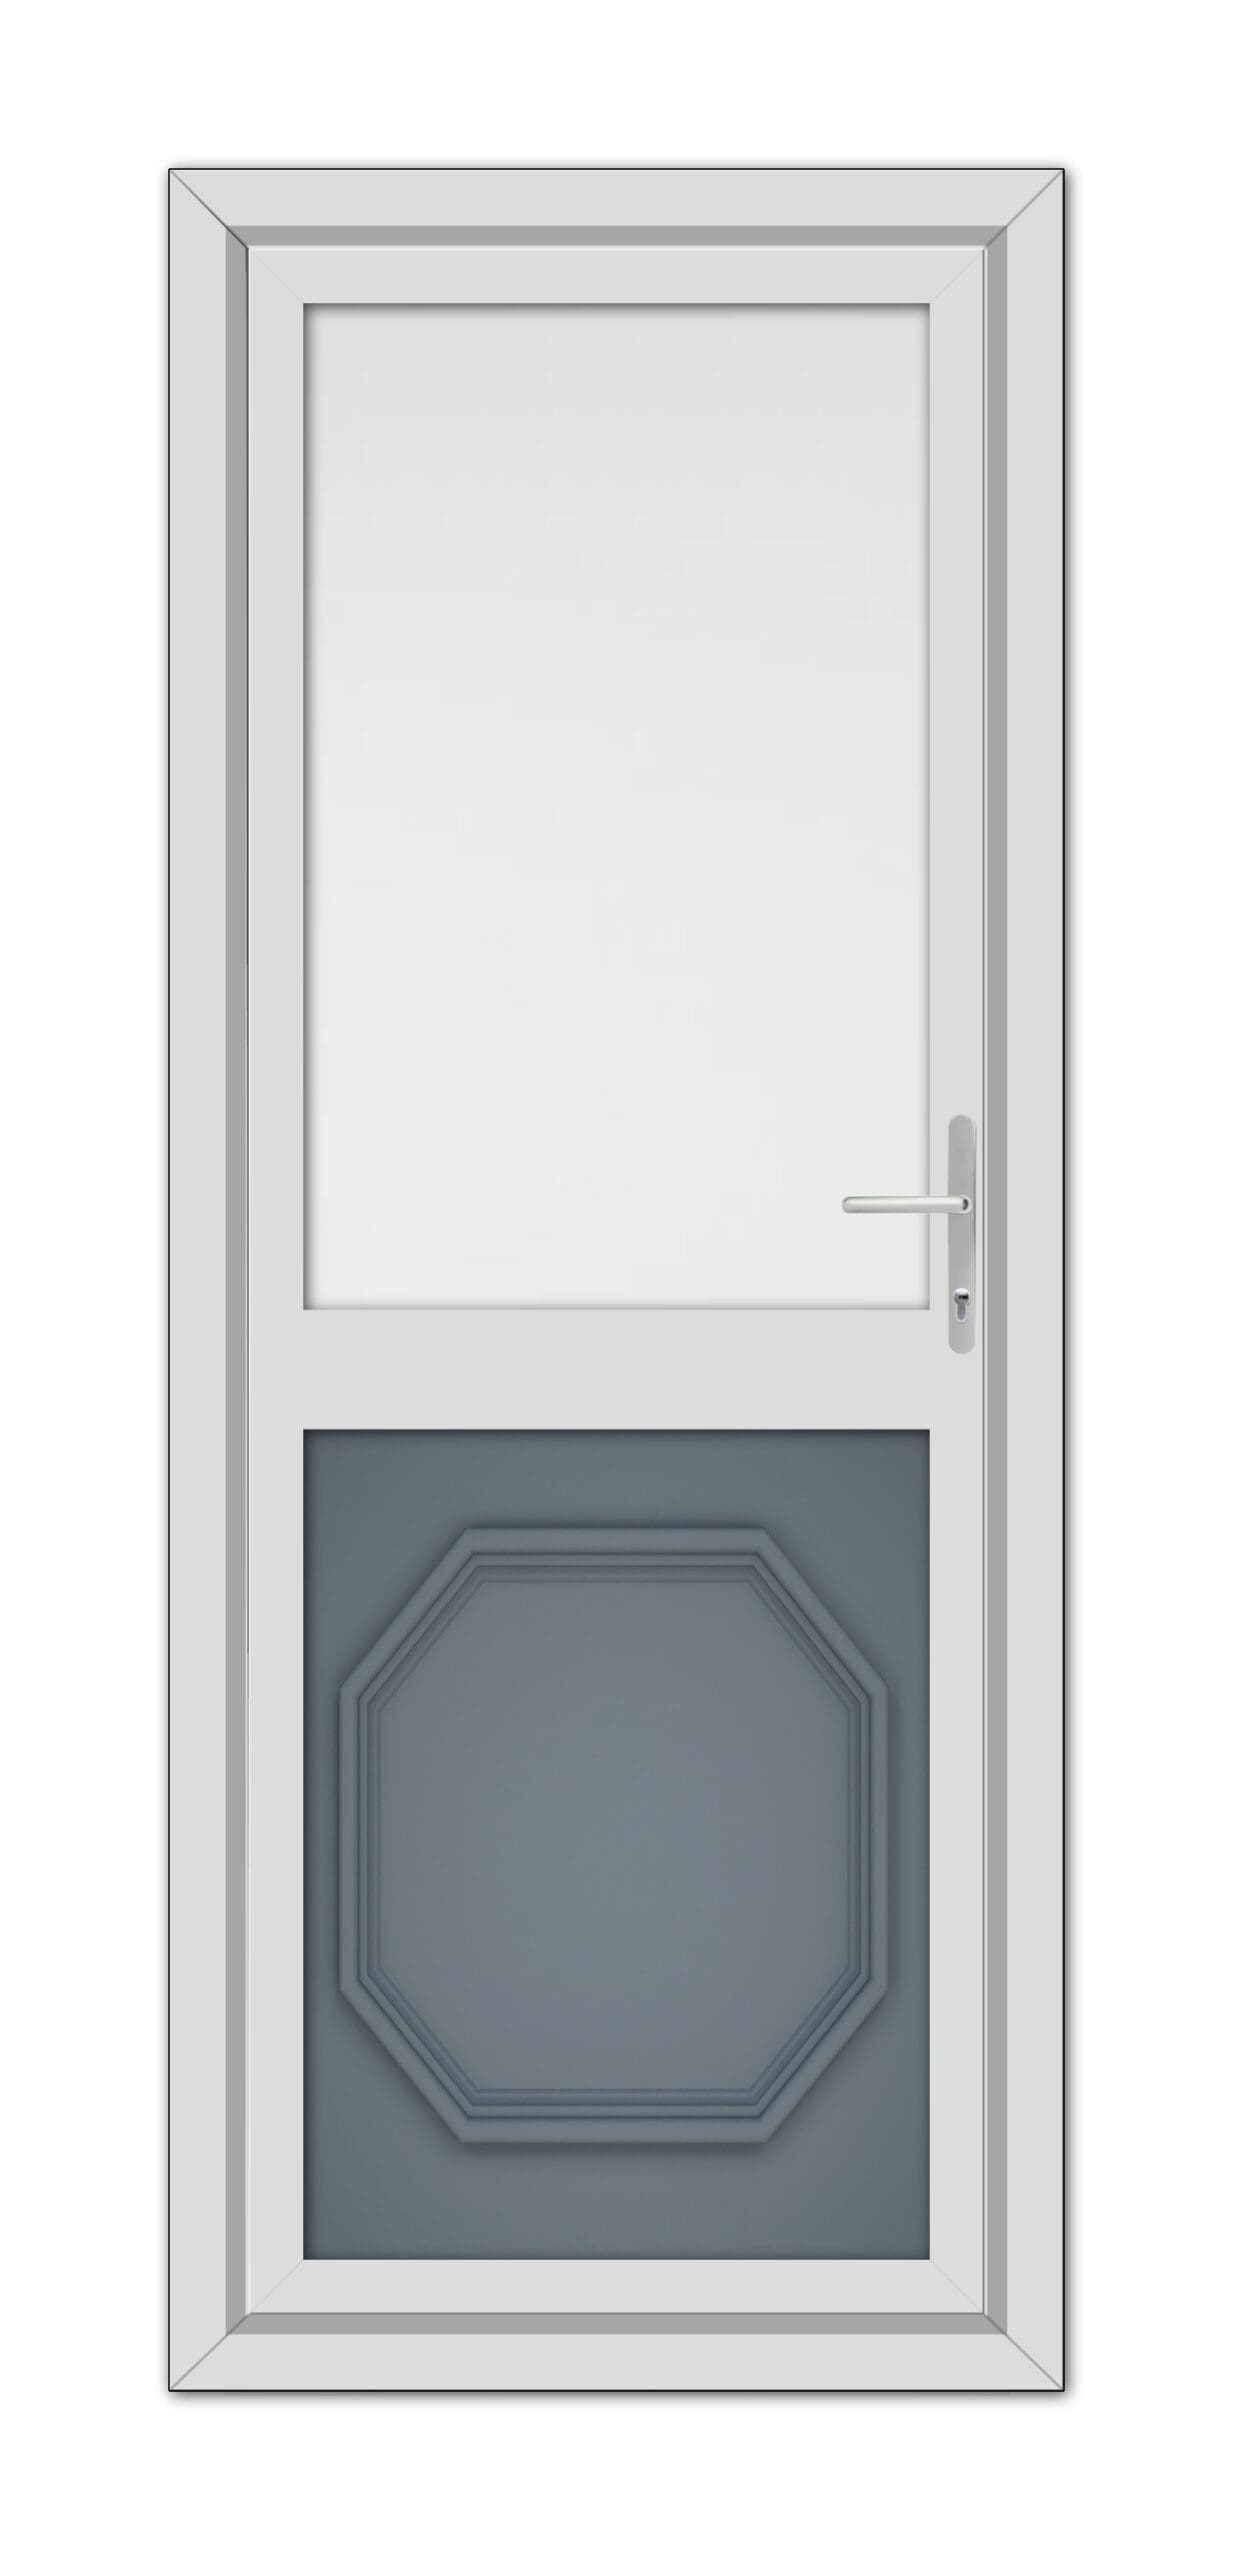 A closed Slate Grey Buckingham Half uPVC Back Door in a white frame with a small square window at the top and an octagonal panel at the bottom, featuring a metallic handle on the right side.